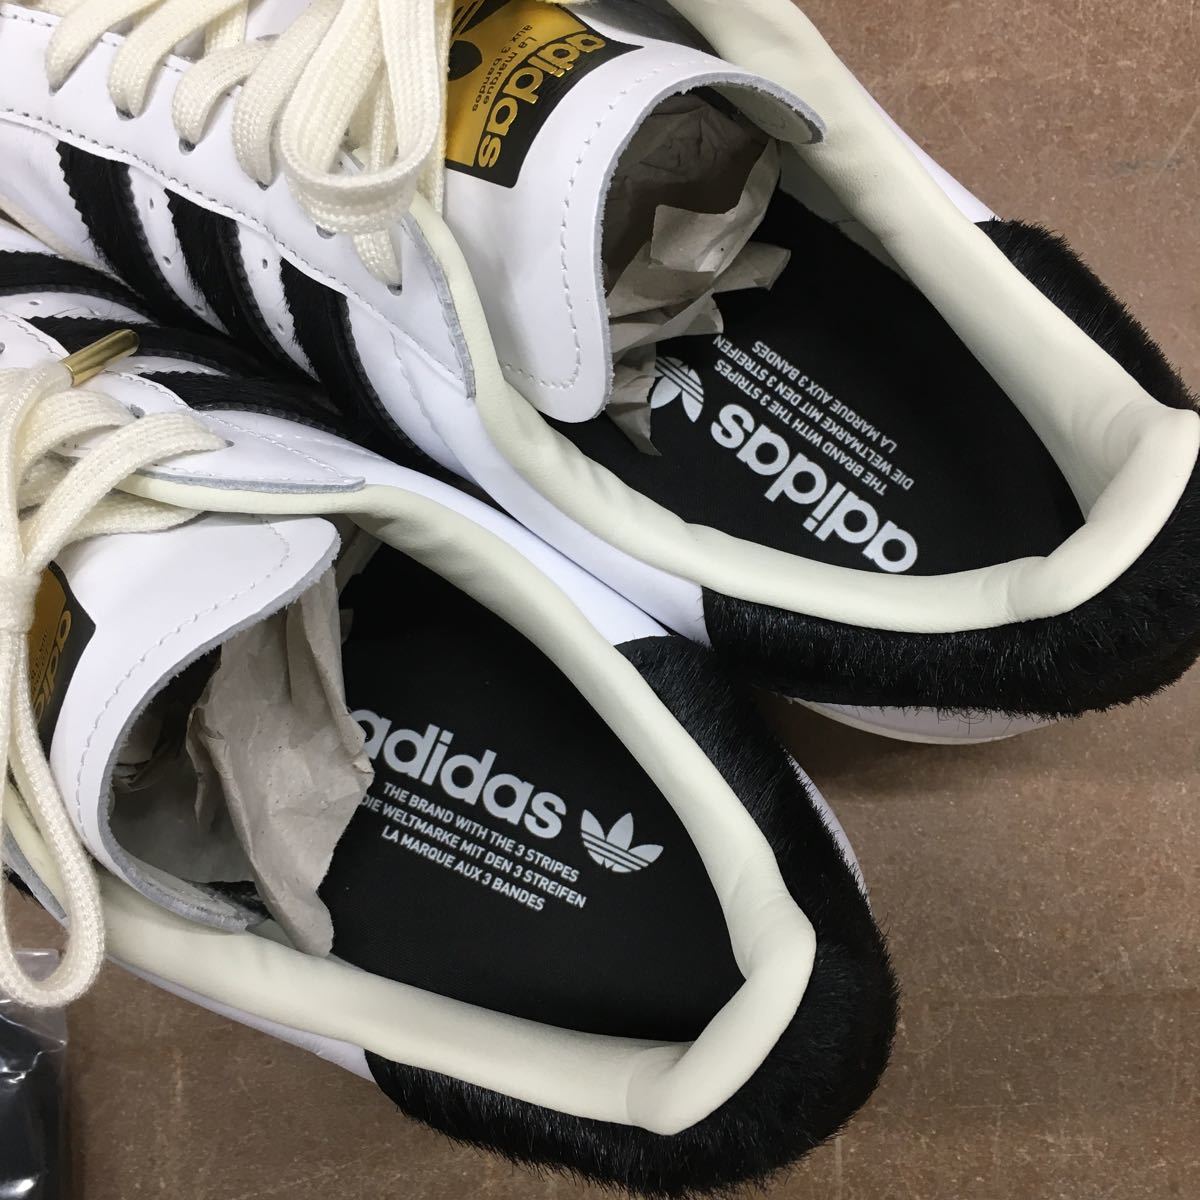 K10/adidas アディダス FW4432 SUPERSTER 27.5cm スニーカー product details | Proxy bidding and ordering service for auctions and shopping within Japan the United States - Get the latest news on sales and